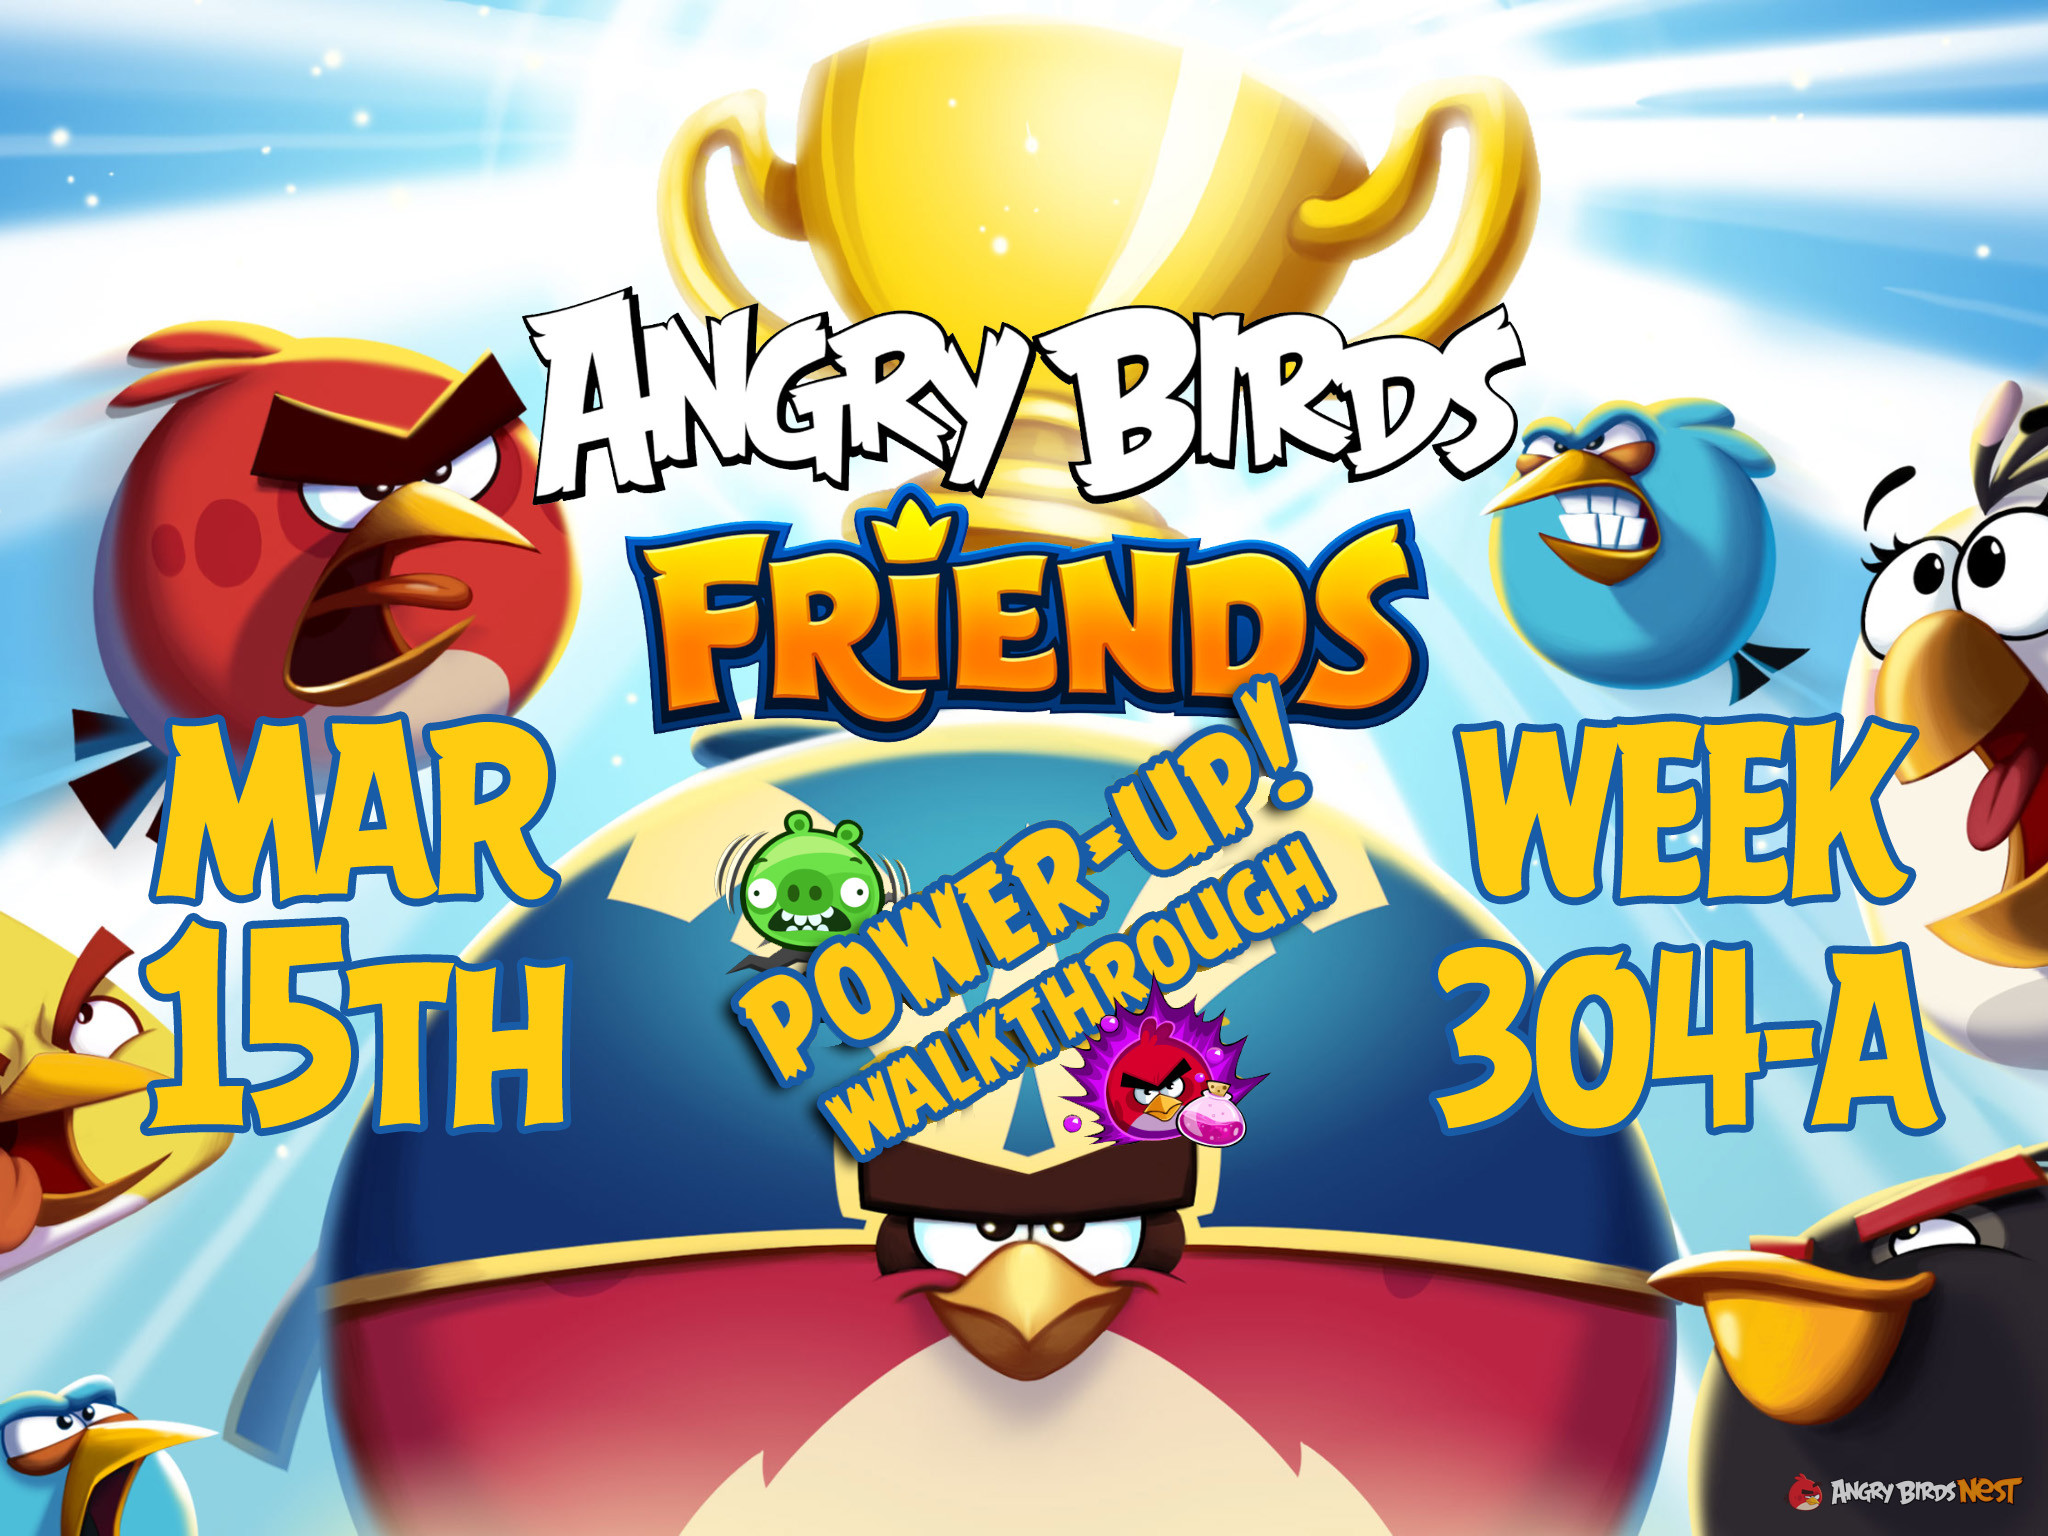 Angry Birds Friends Tournament Week 304-A Feature Image PU